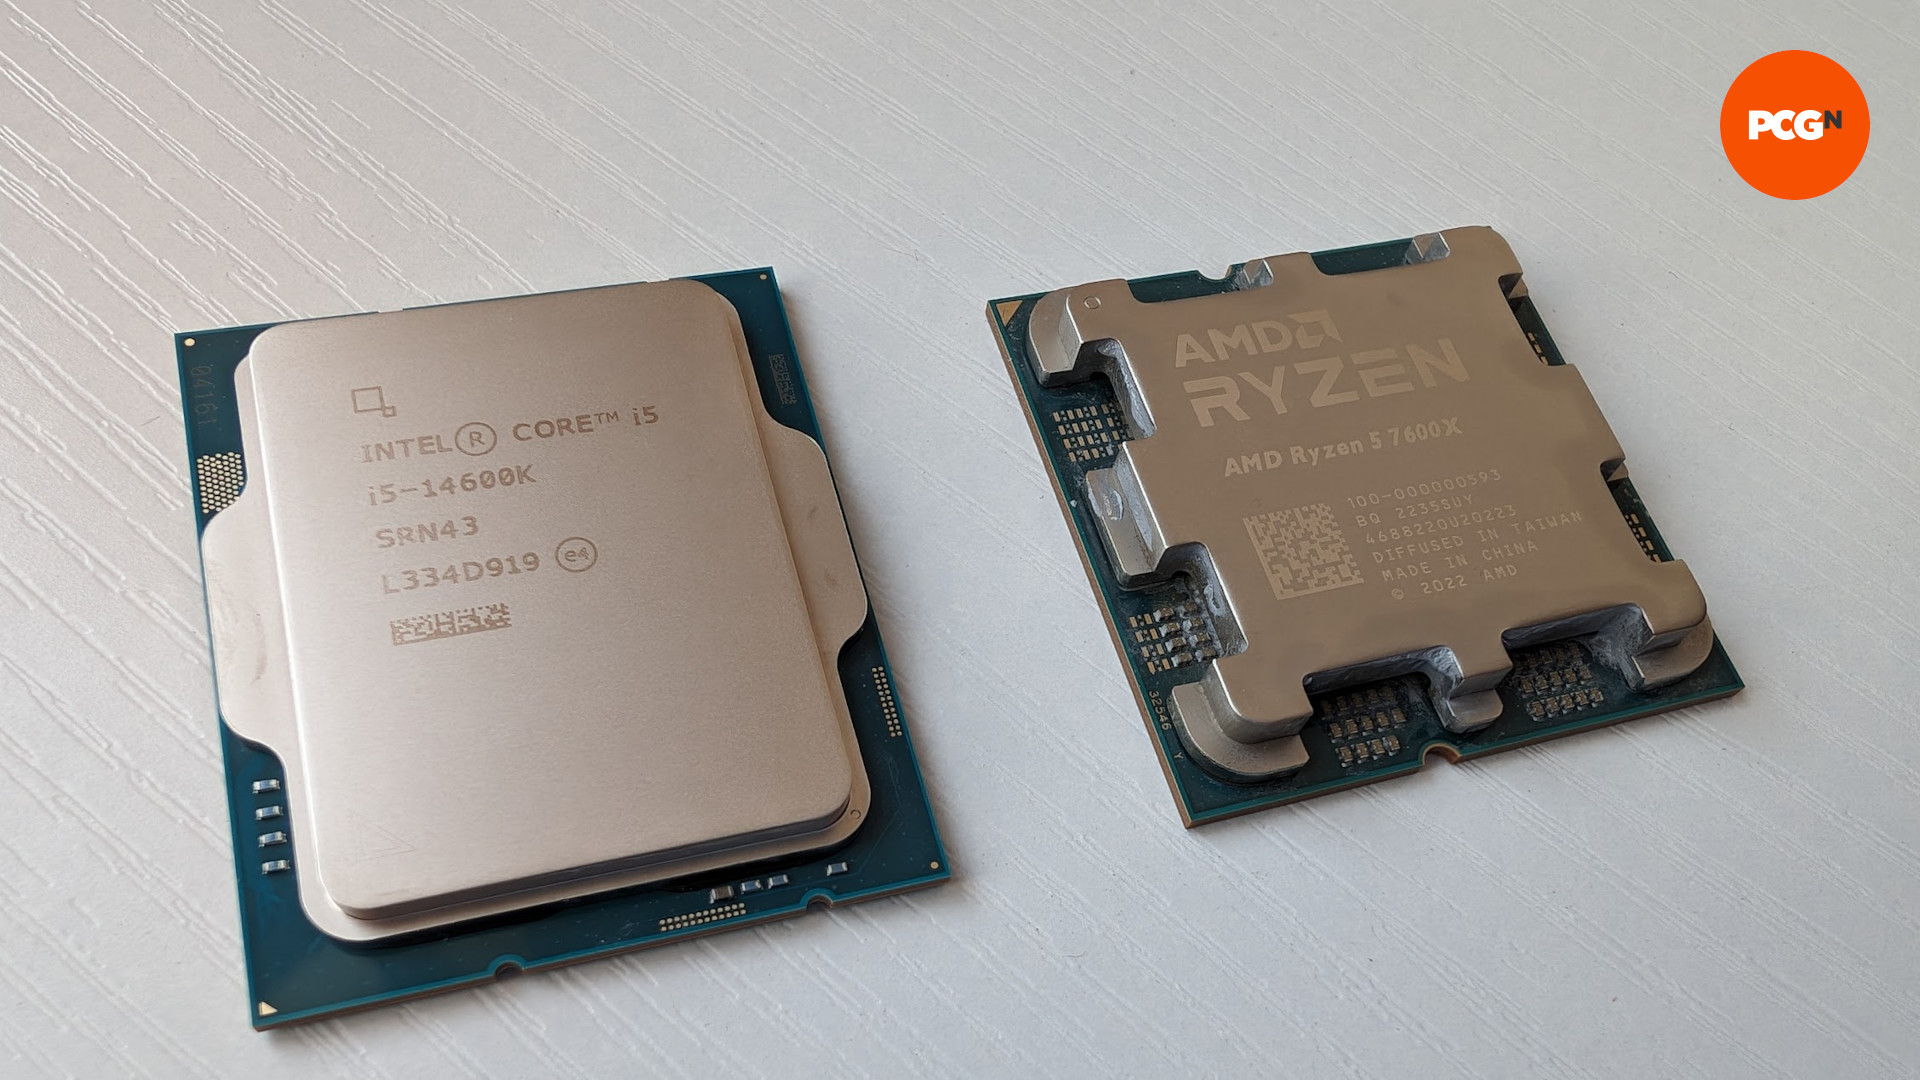 PCGamesN on X: The Intel Core i5 14600K has all the hallmarks of a great  midrange processor to take on AMD, but the CPU can't escape from under the  shadow of its